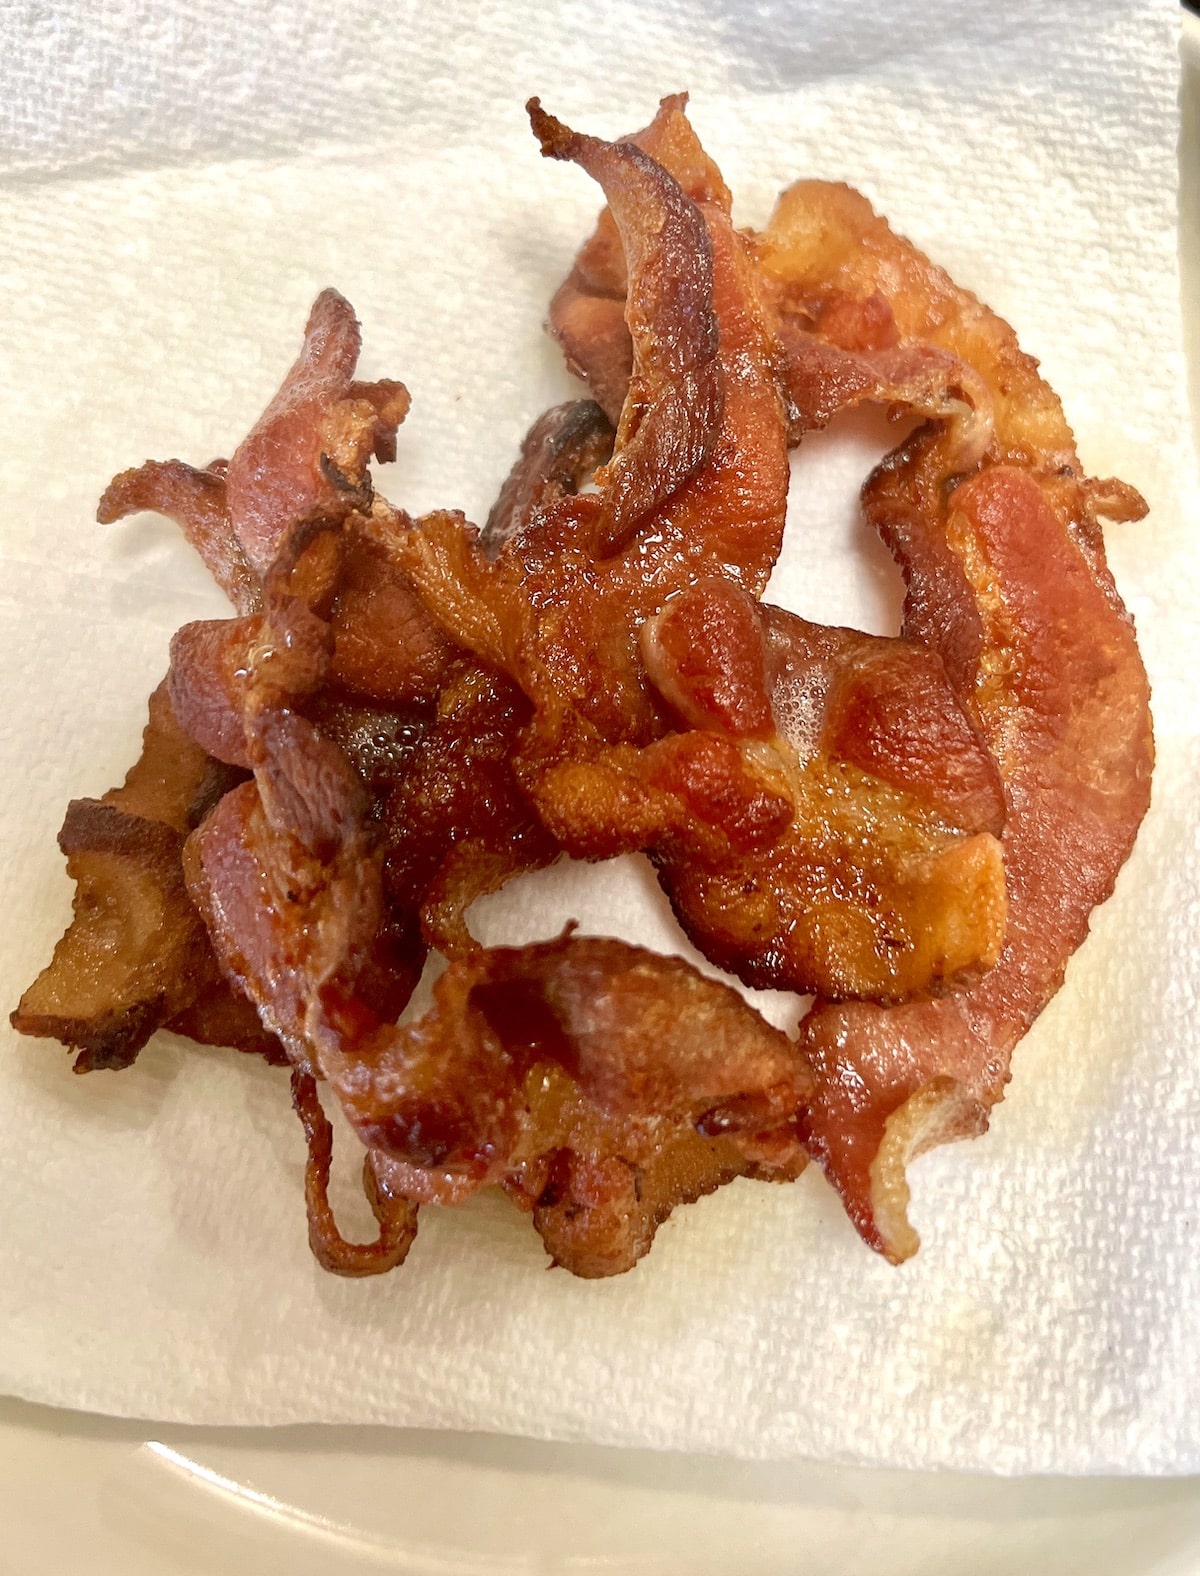 Cooked bacon on paper towel.